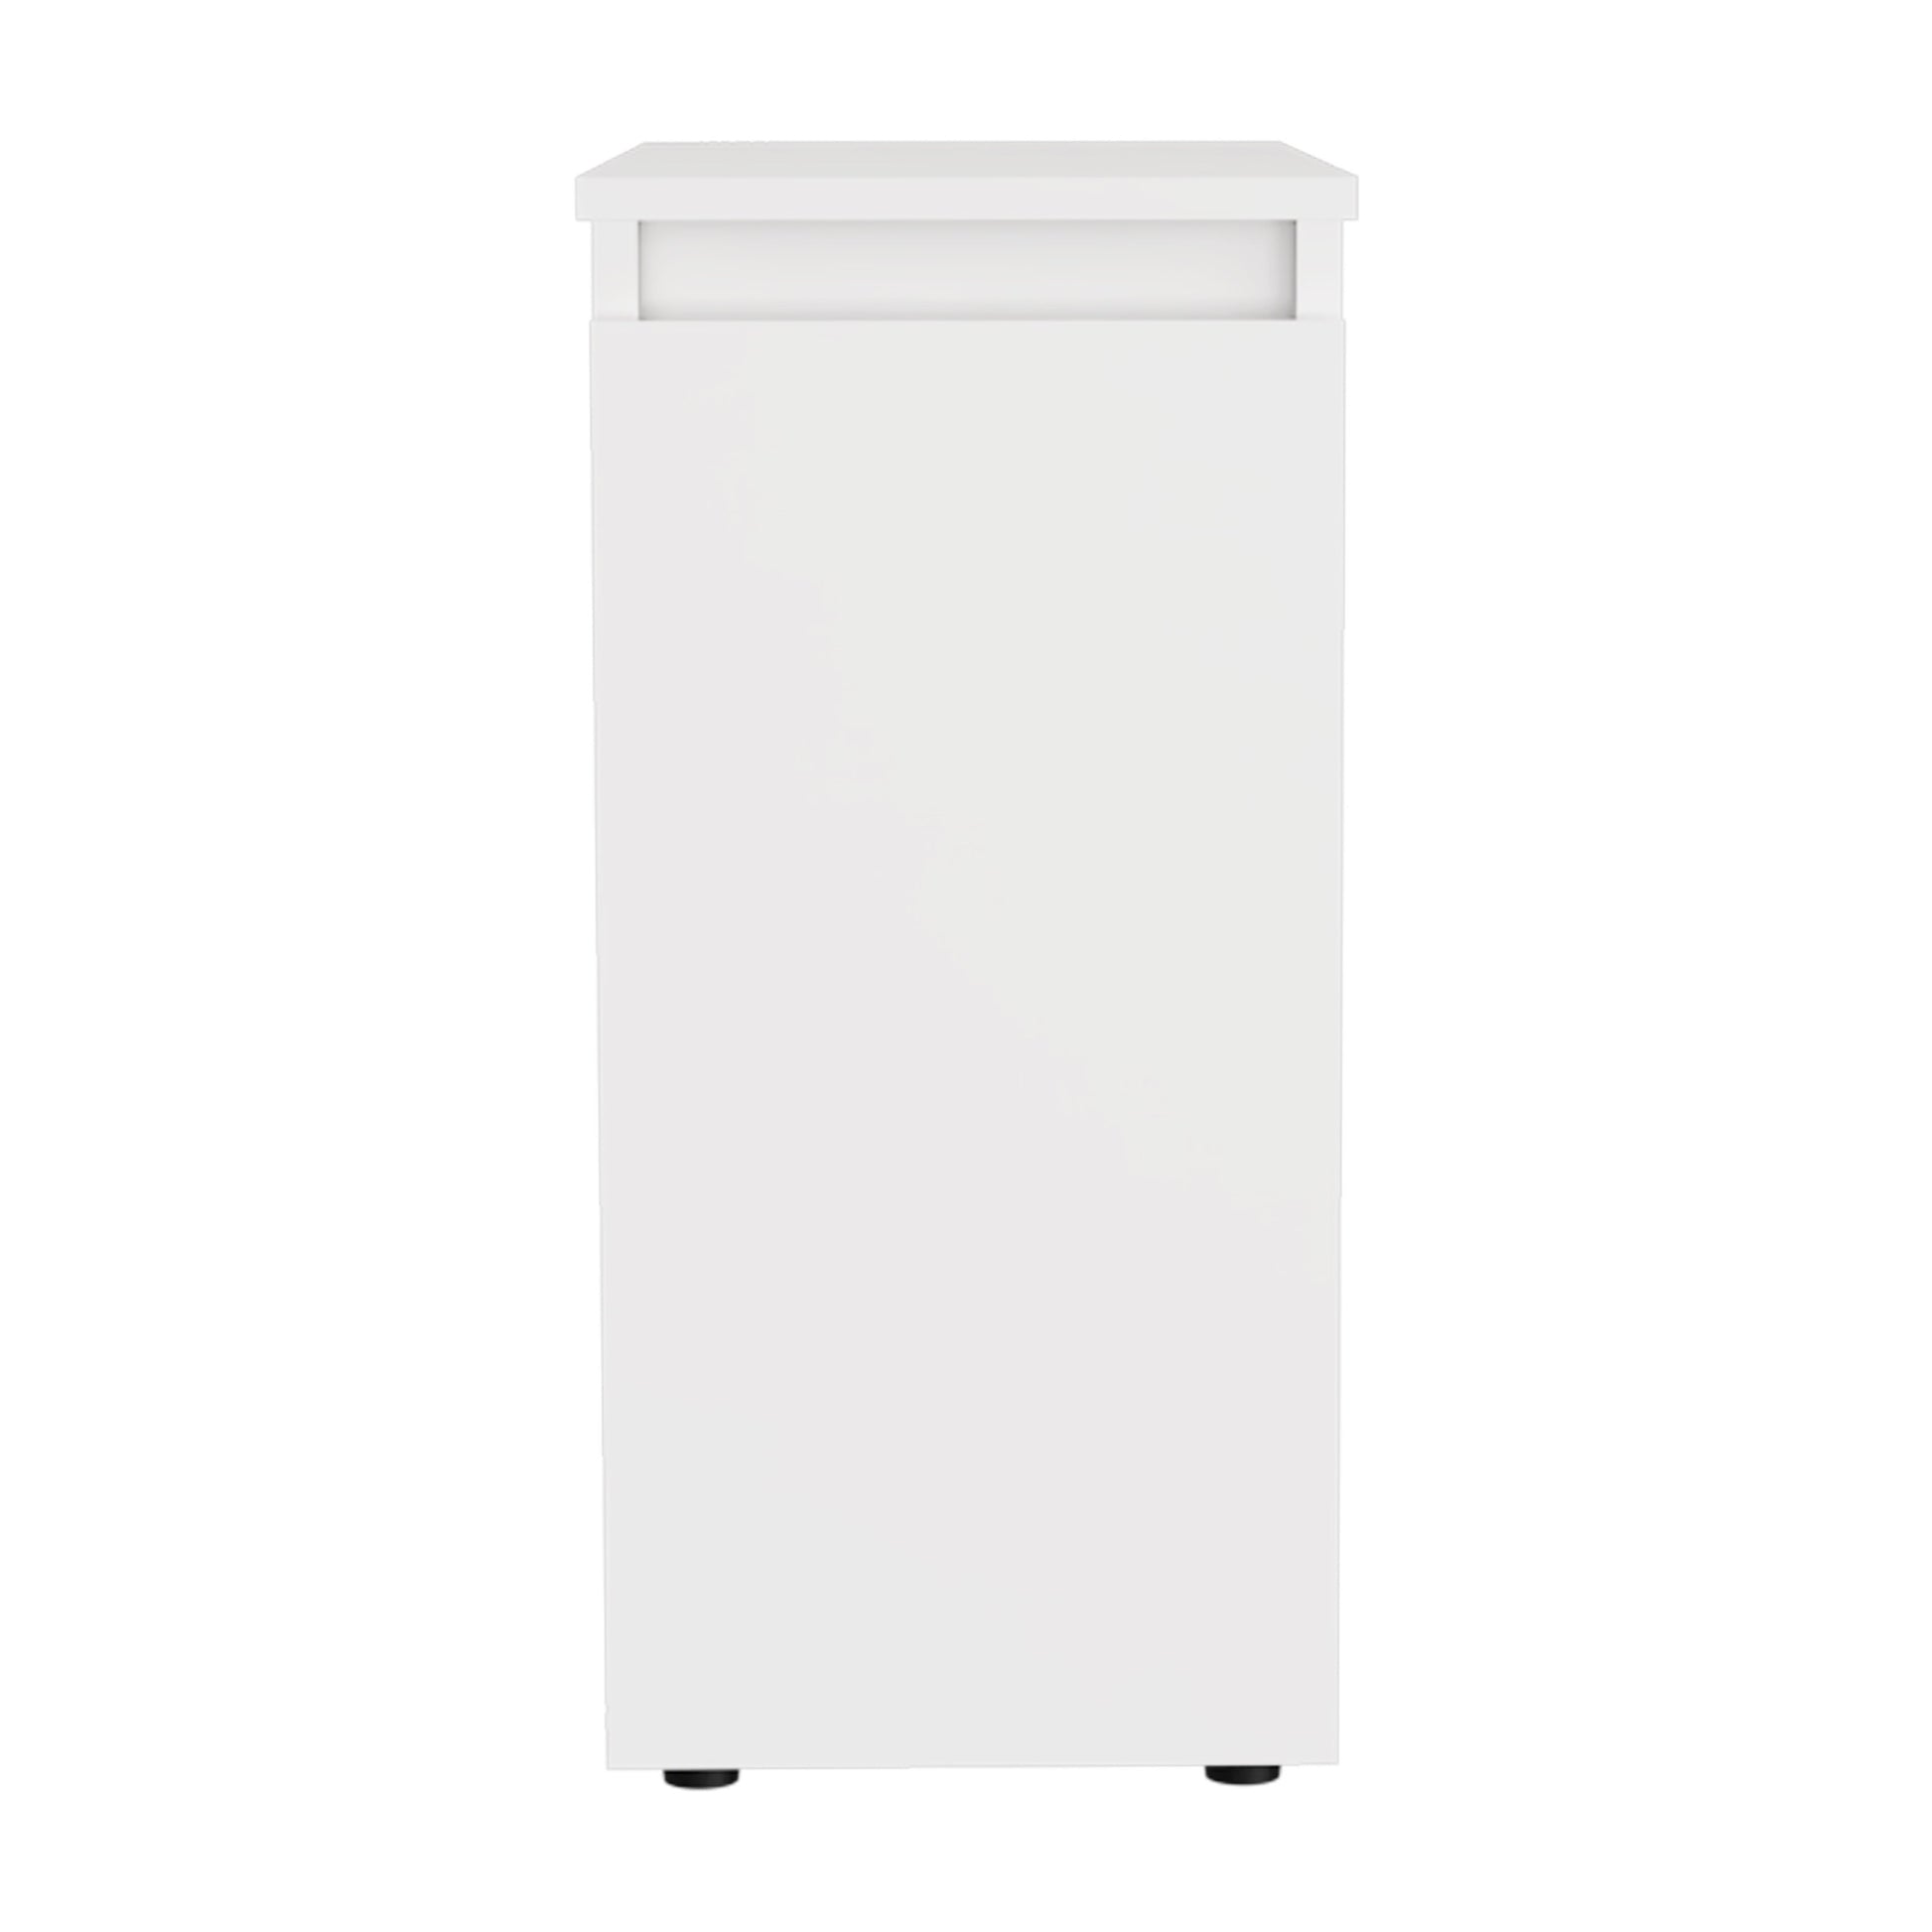 Leicester Bathroom Storage Cabinet, Liftable Top,